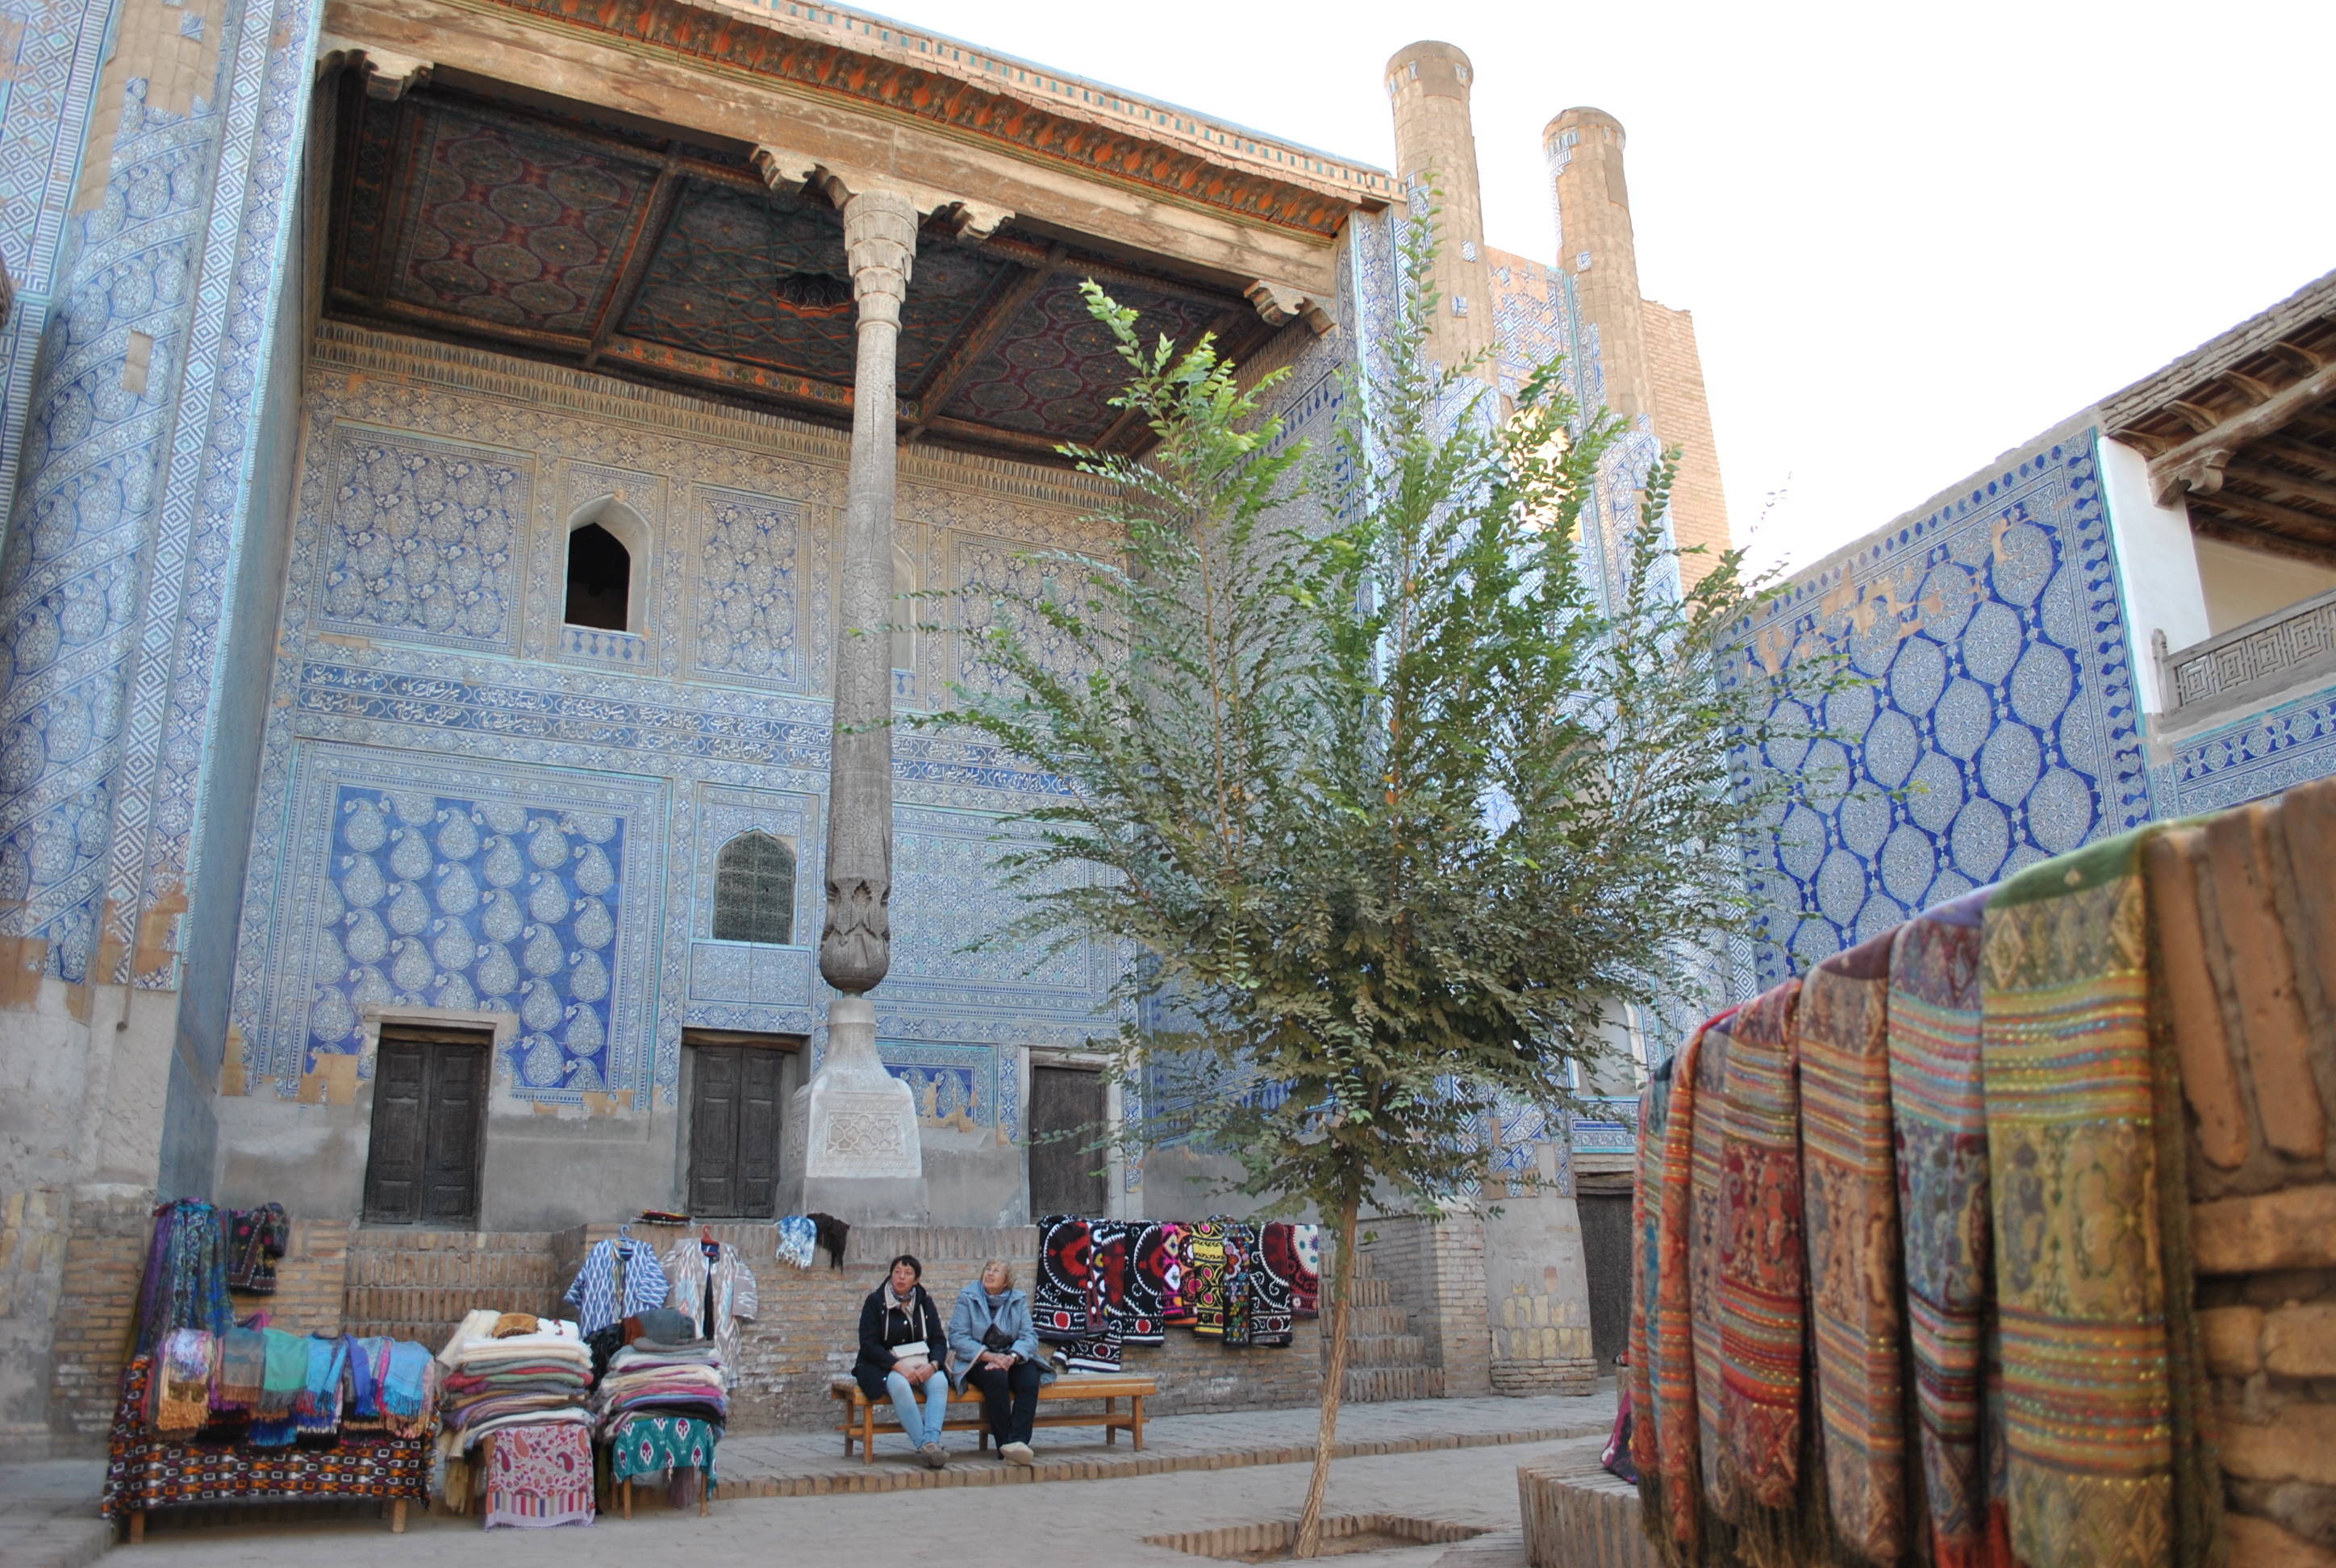 Visitors admiring Itchan Kala, the inner fortress of Khiva, full of craft vendors. 